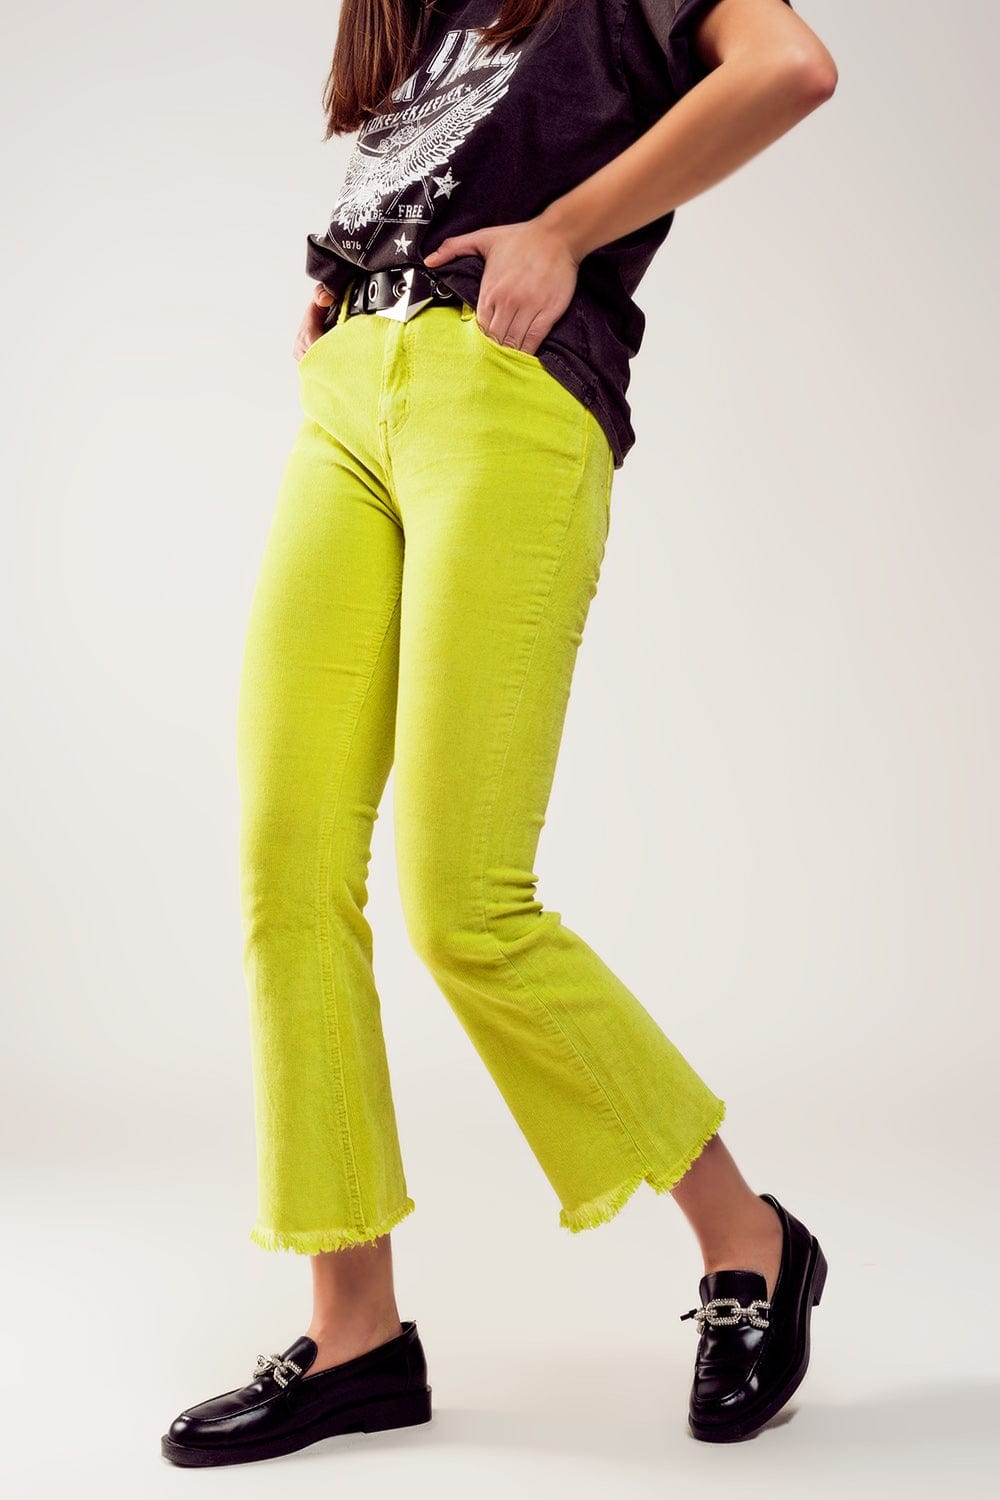 Q2 Women's Pants & Trousers Flare Corduroy Pants in Lime Green